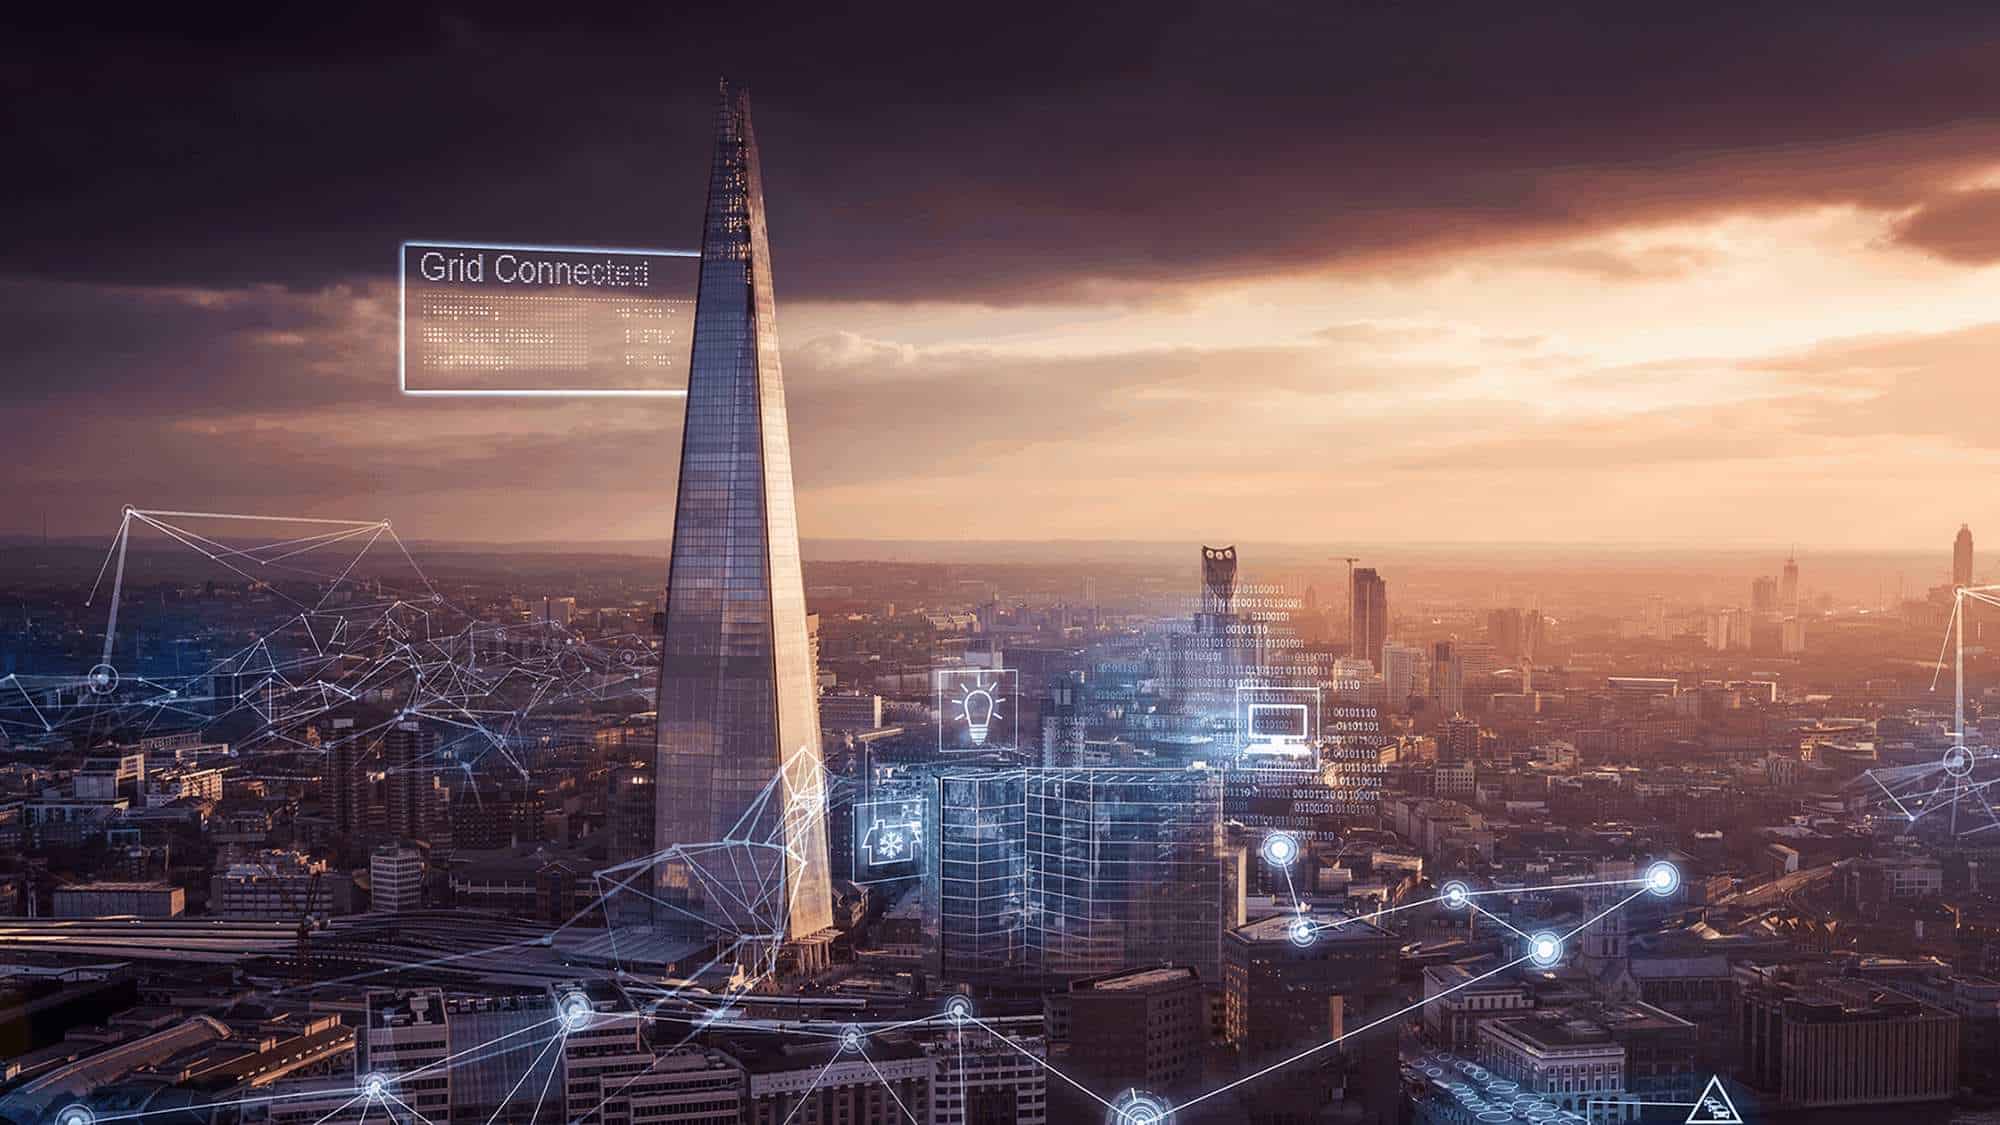 Image of London skyline with illustration of a smart energy grid.